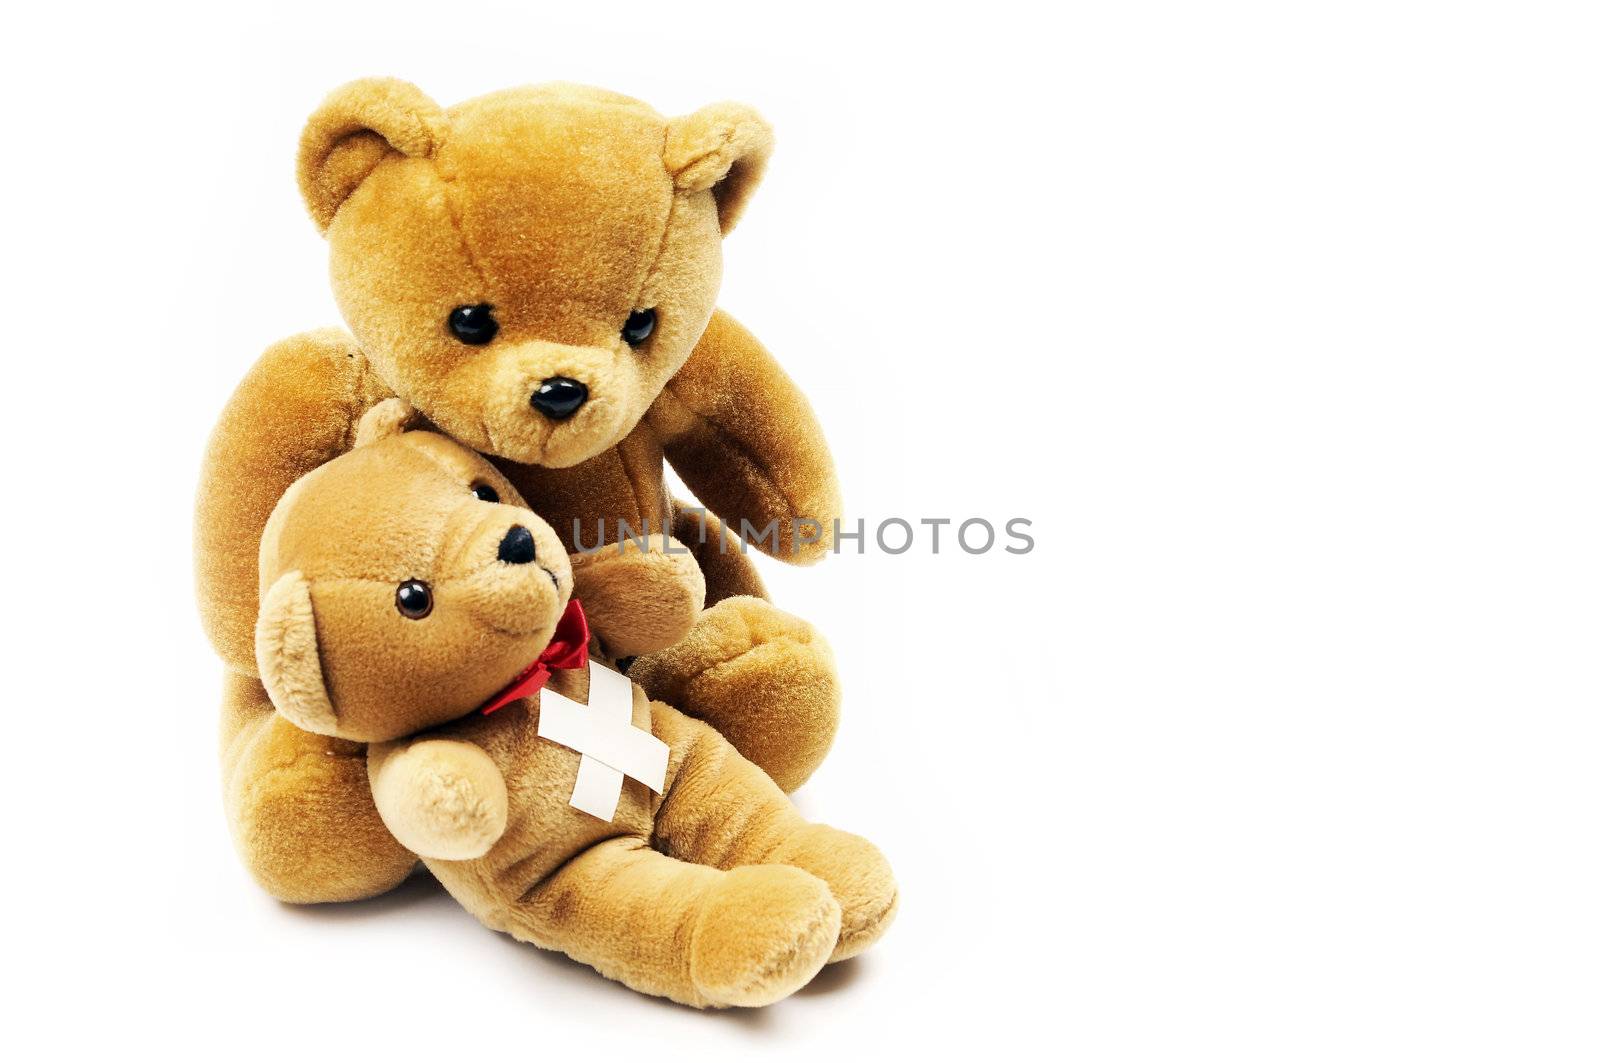 Teddy bears with patch by ljusnan69